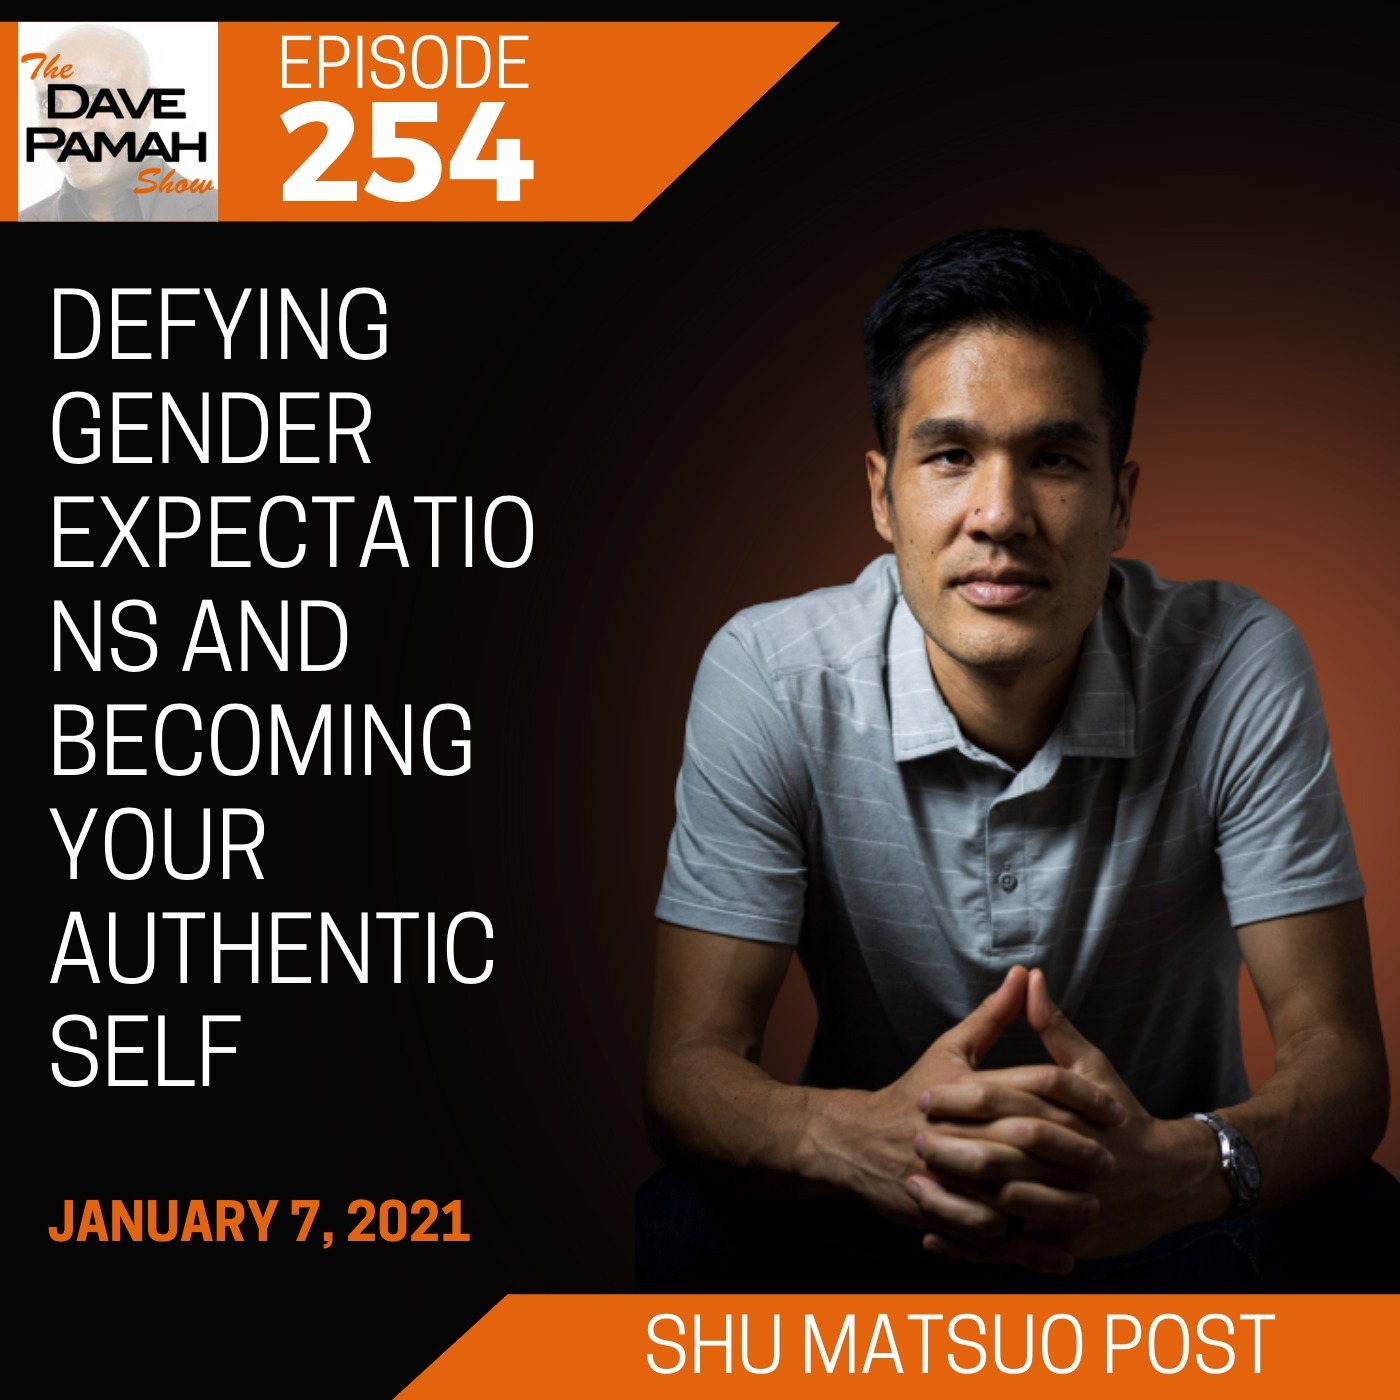 Defying gender expectations and becoming your authentic self with Shu Matsuo Post